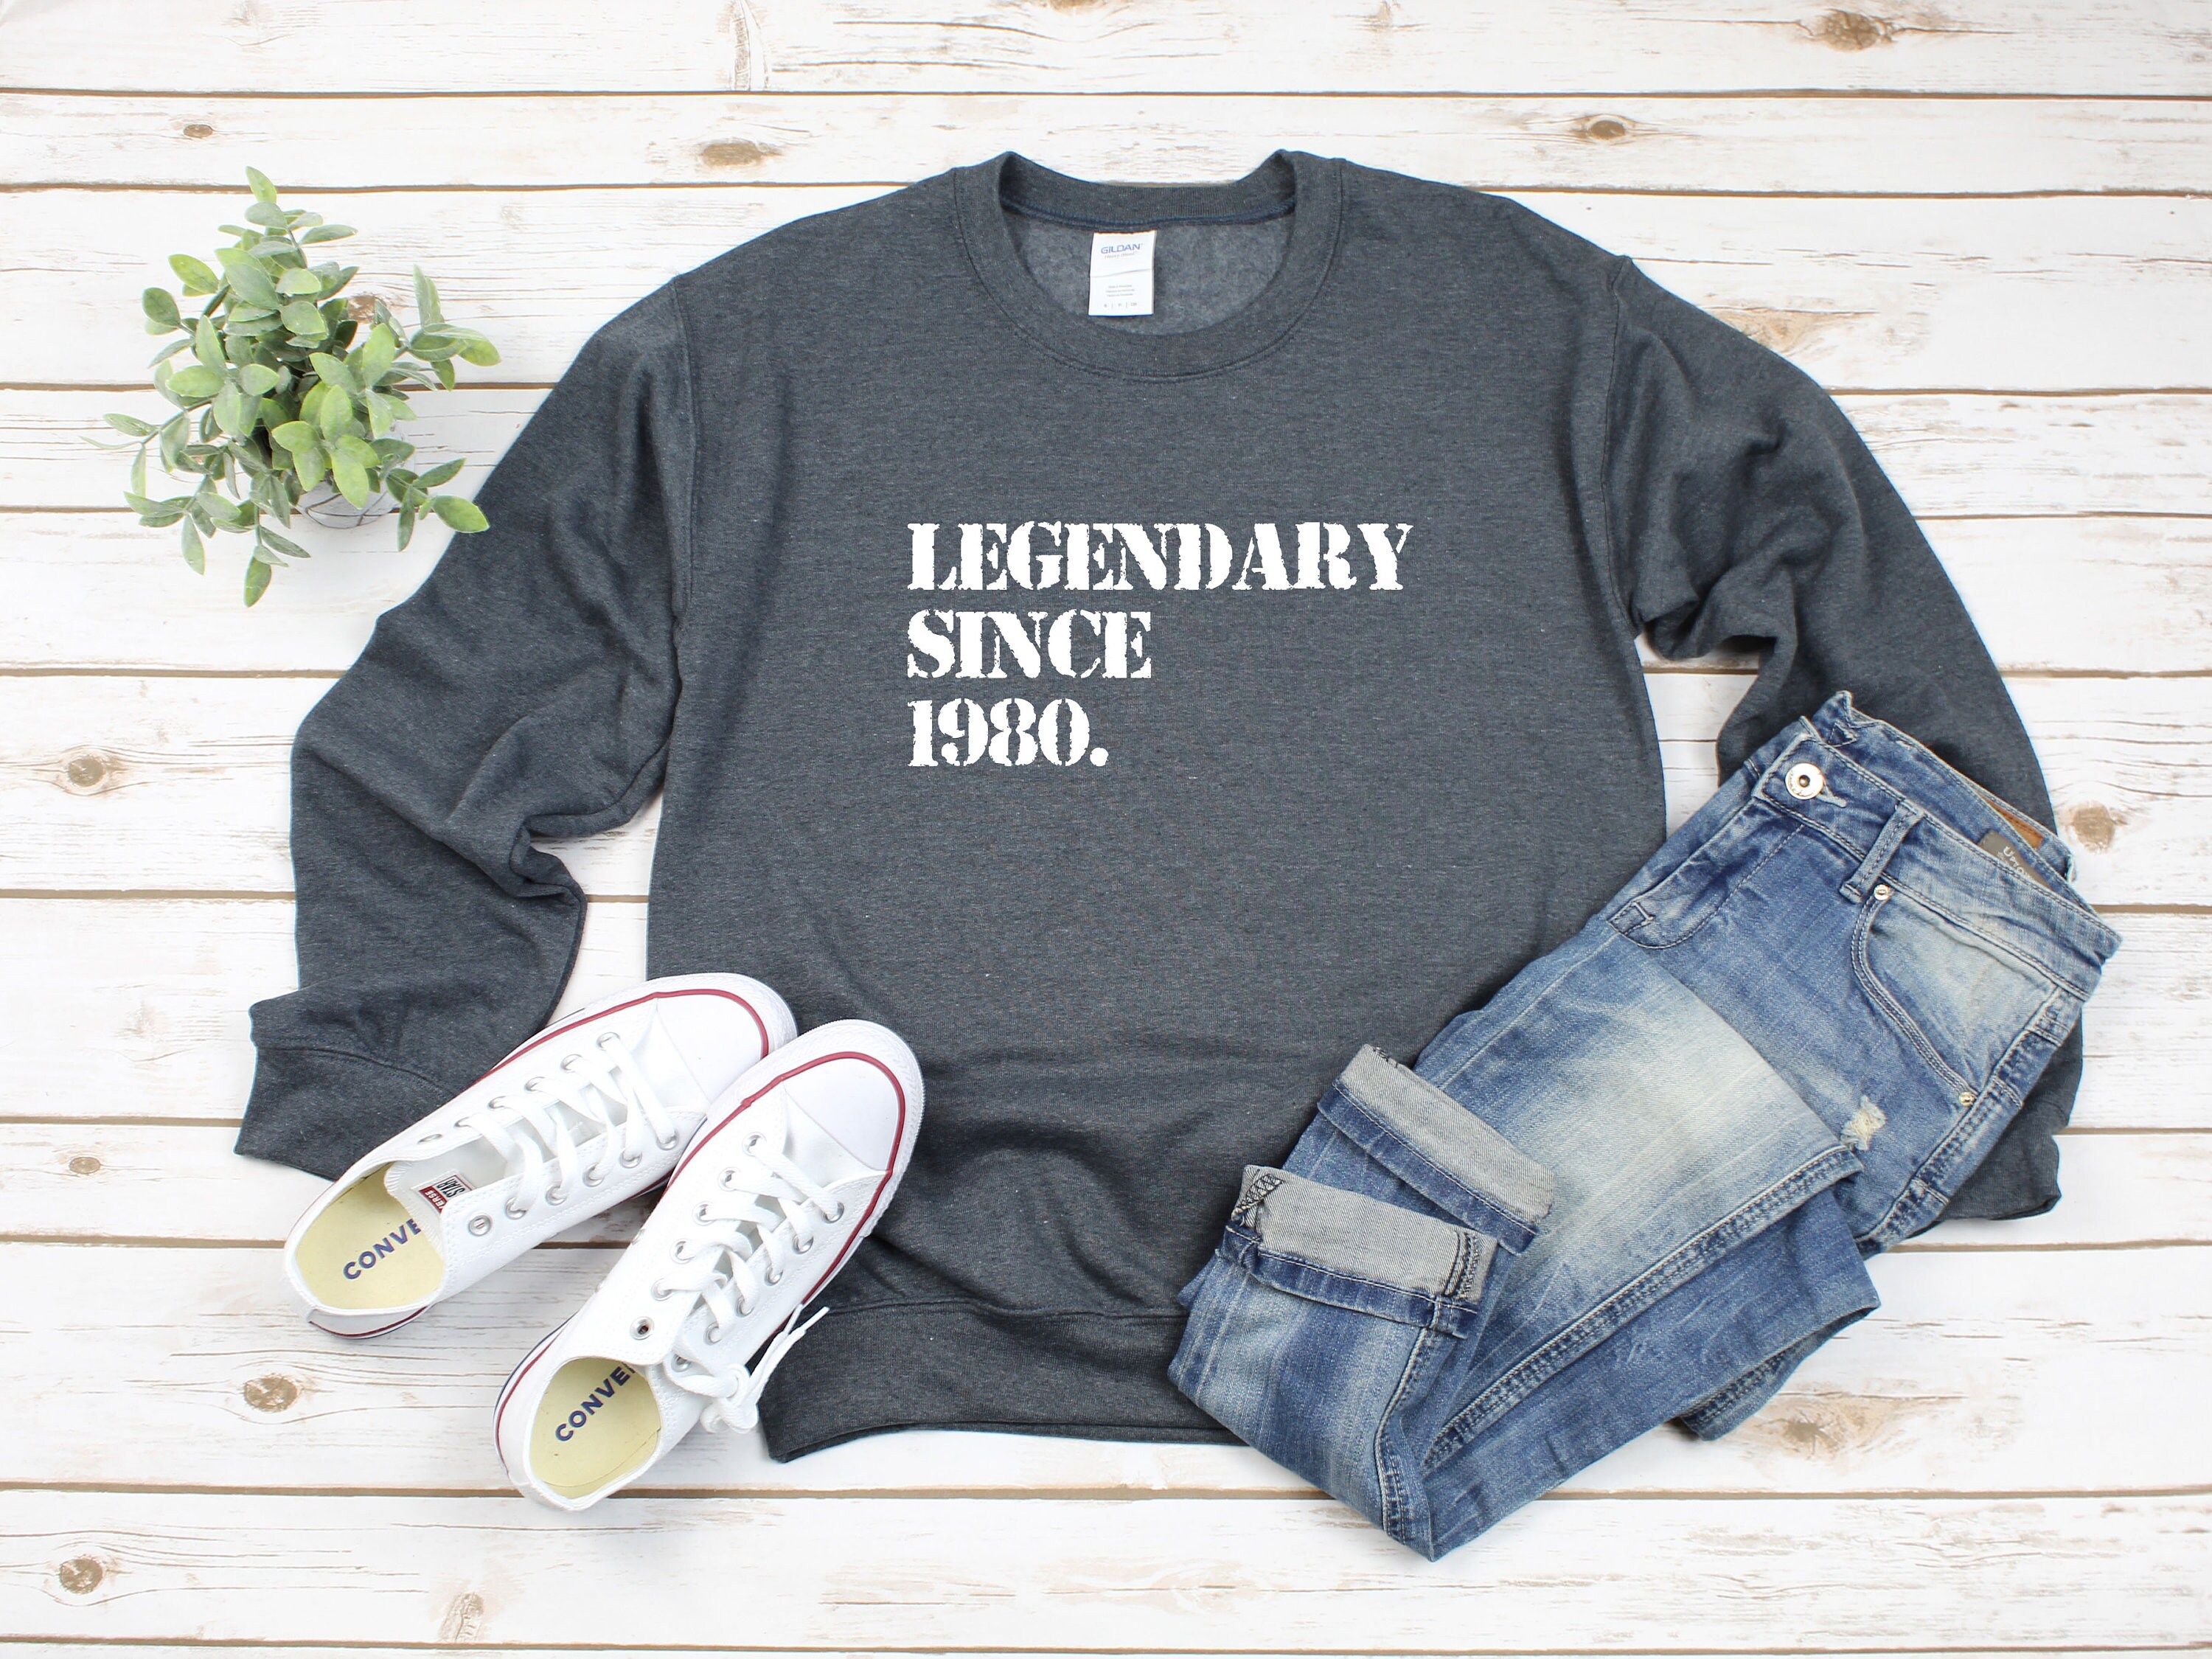 Legendary Since 1980 Heavy Blend Crewneck Sweatshirt, 40Th Birthday Sweater, Fall Gift For 40Th, Her